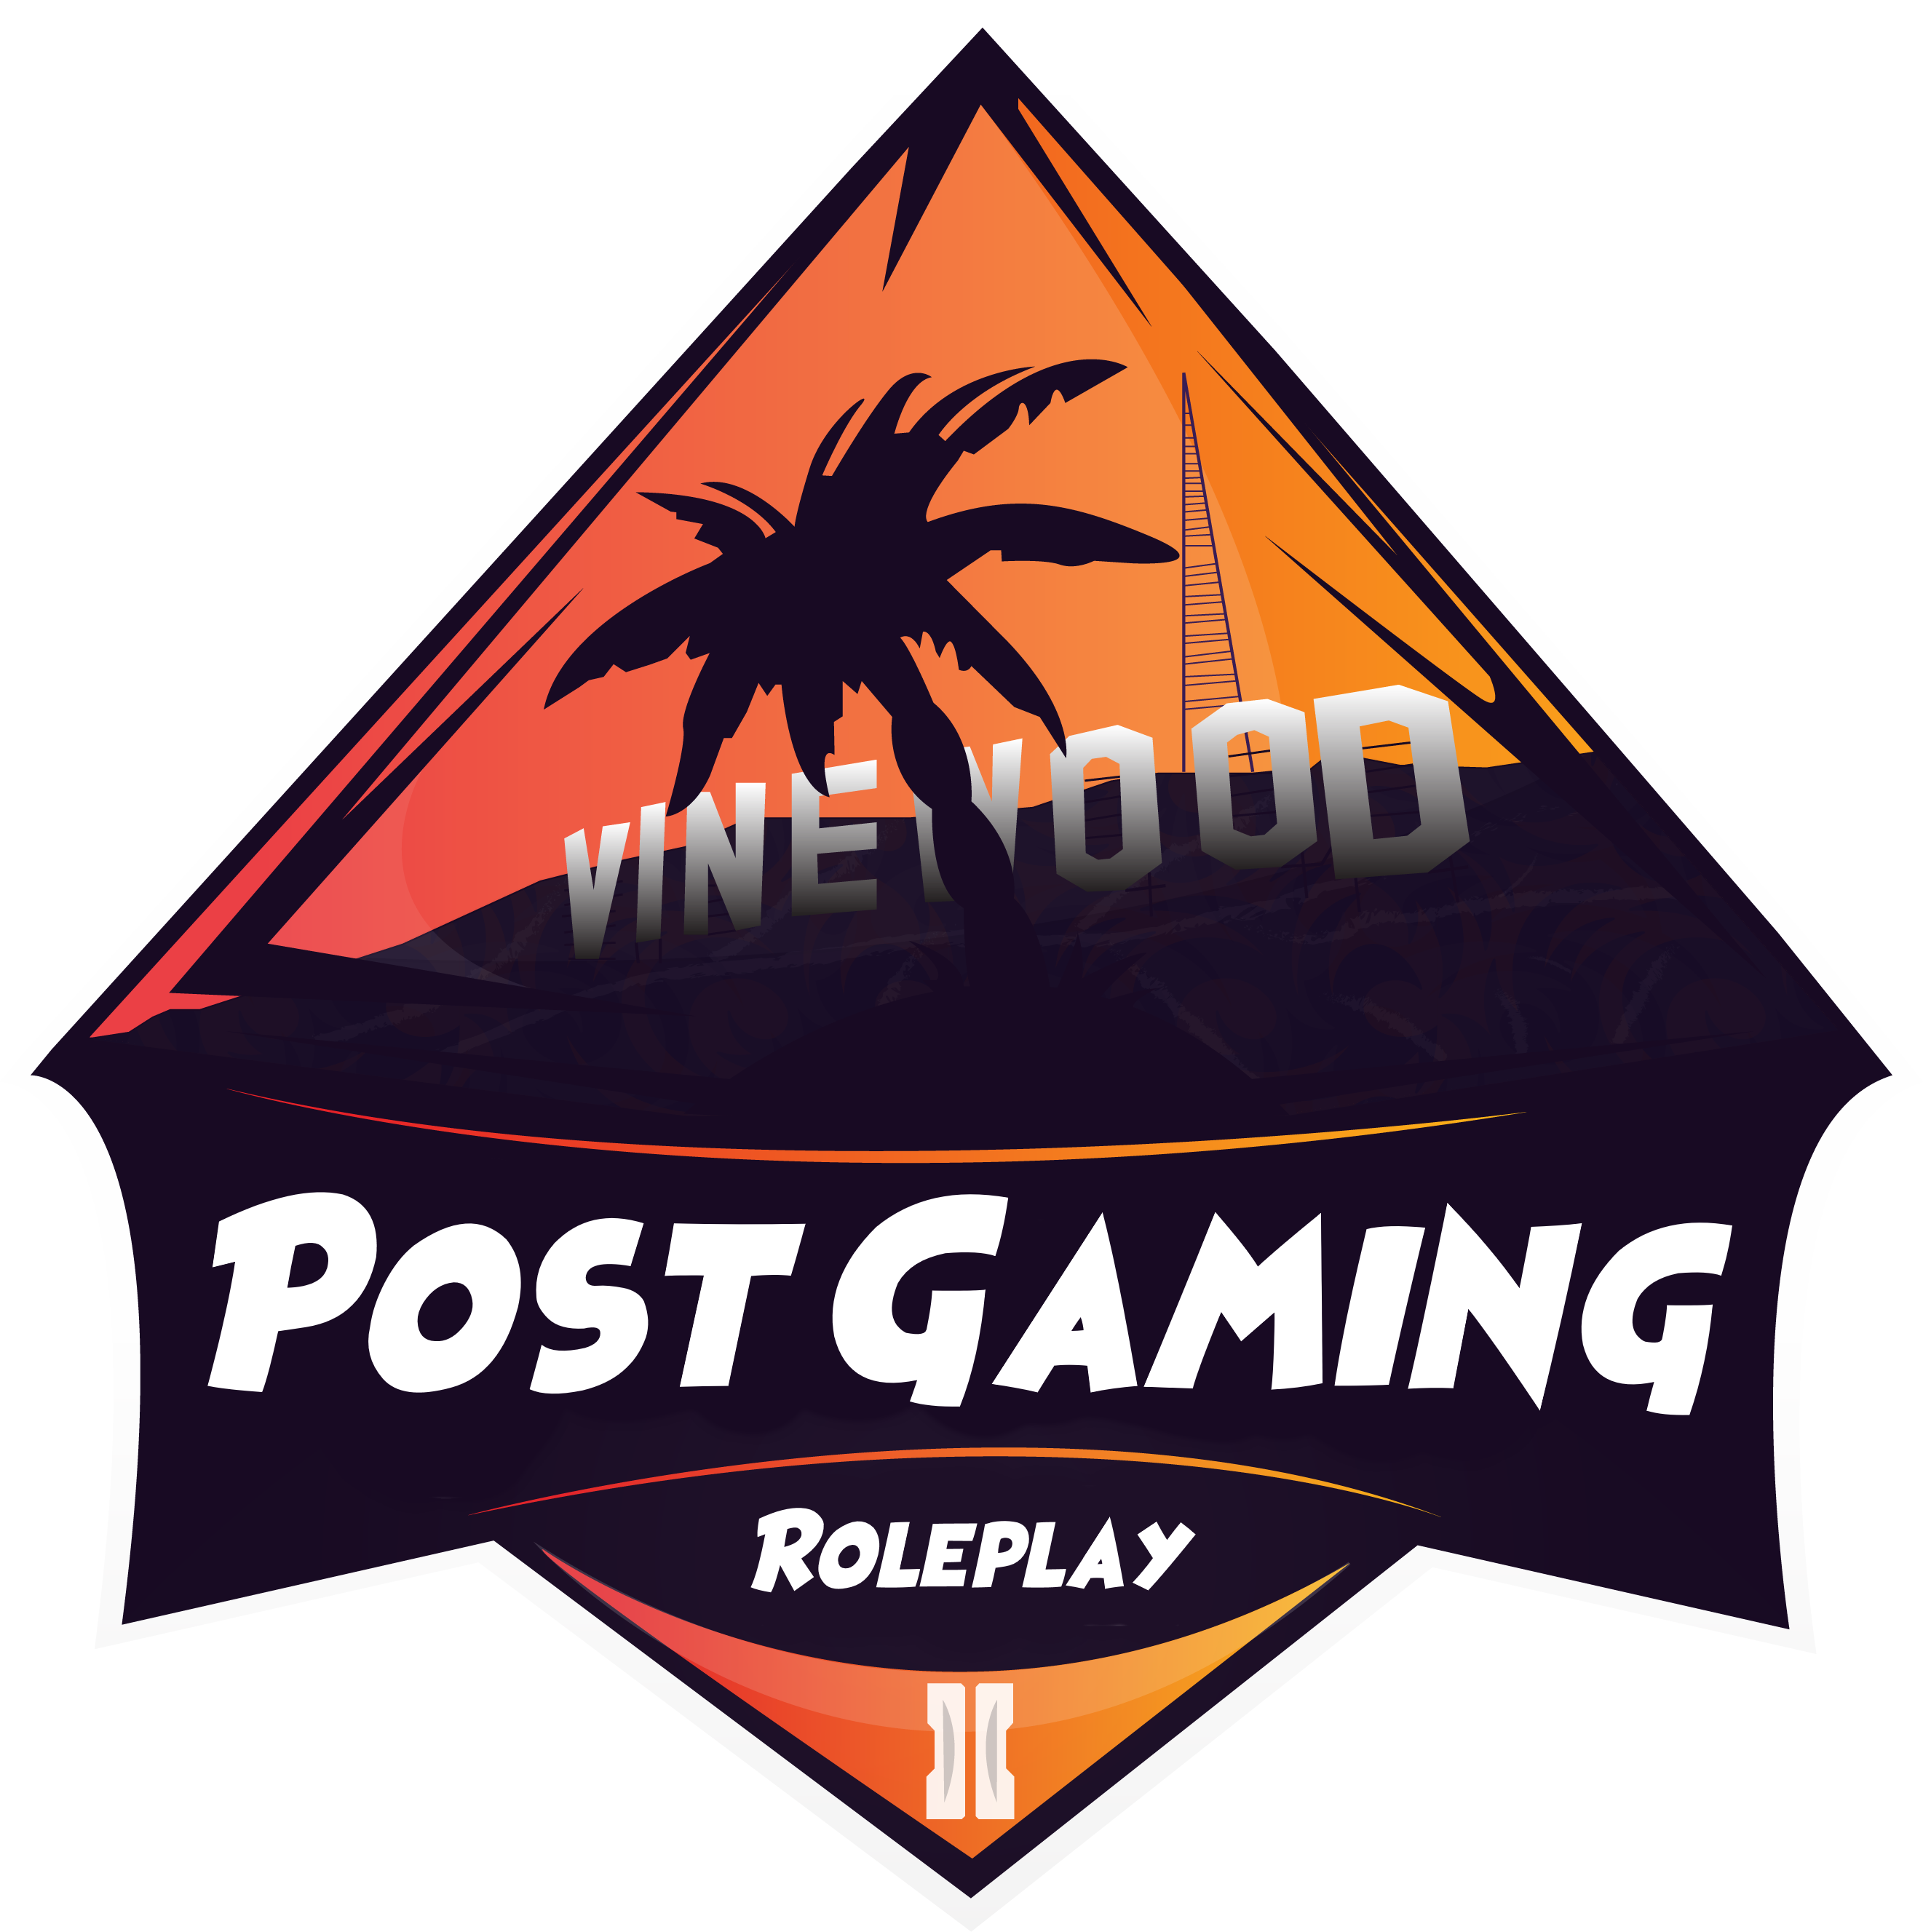 Post Gaming Roleplay Pgrp Looking For Members Leo Ems Dispatch